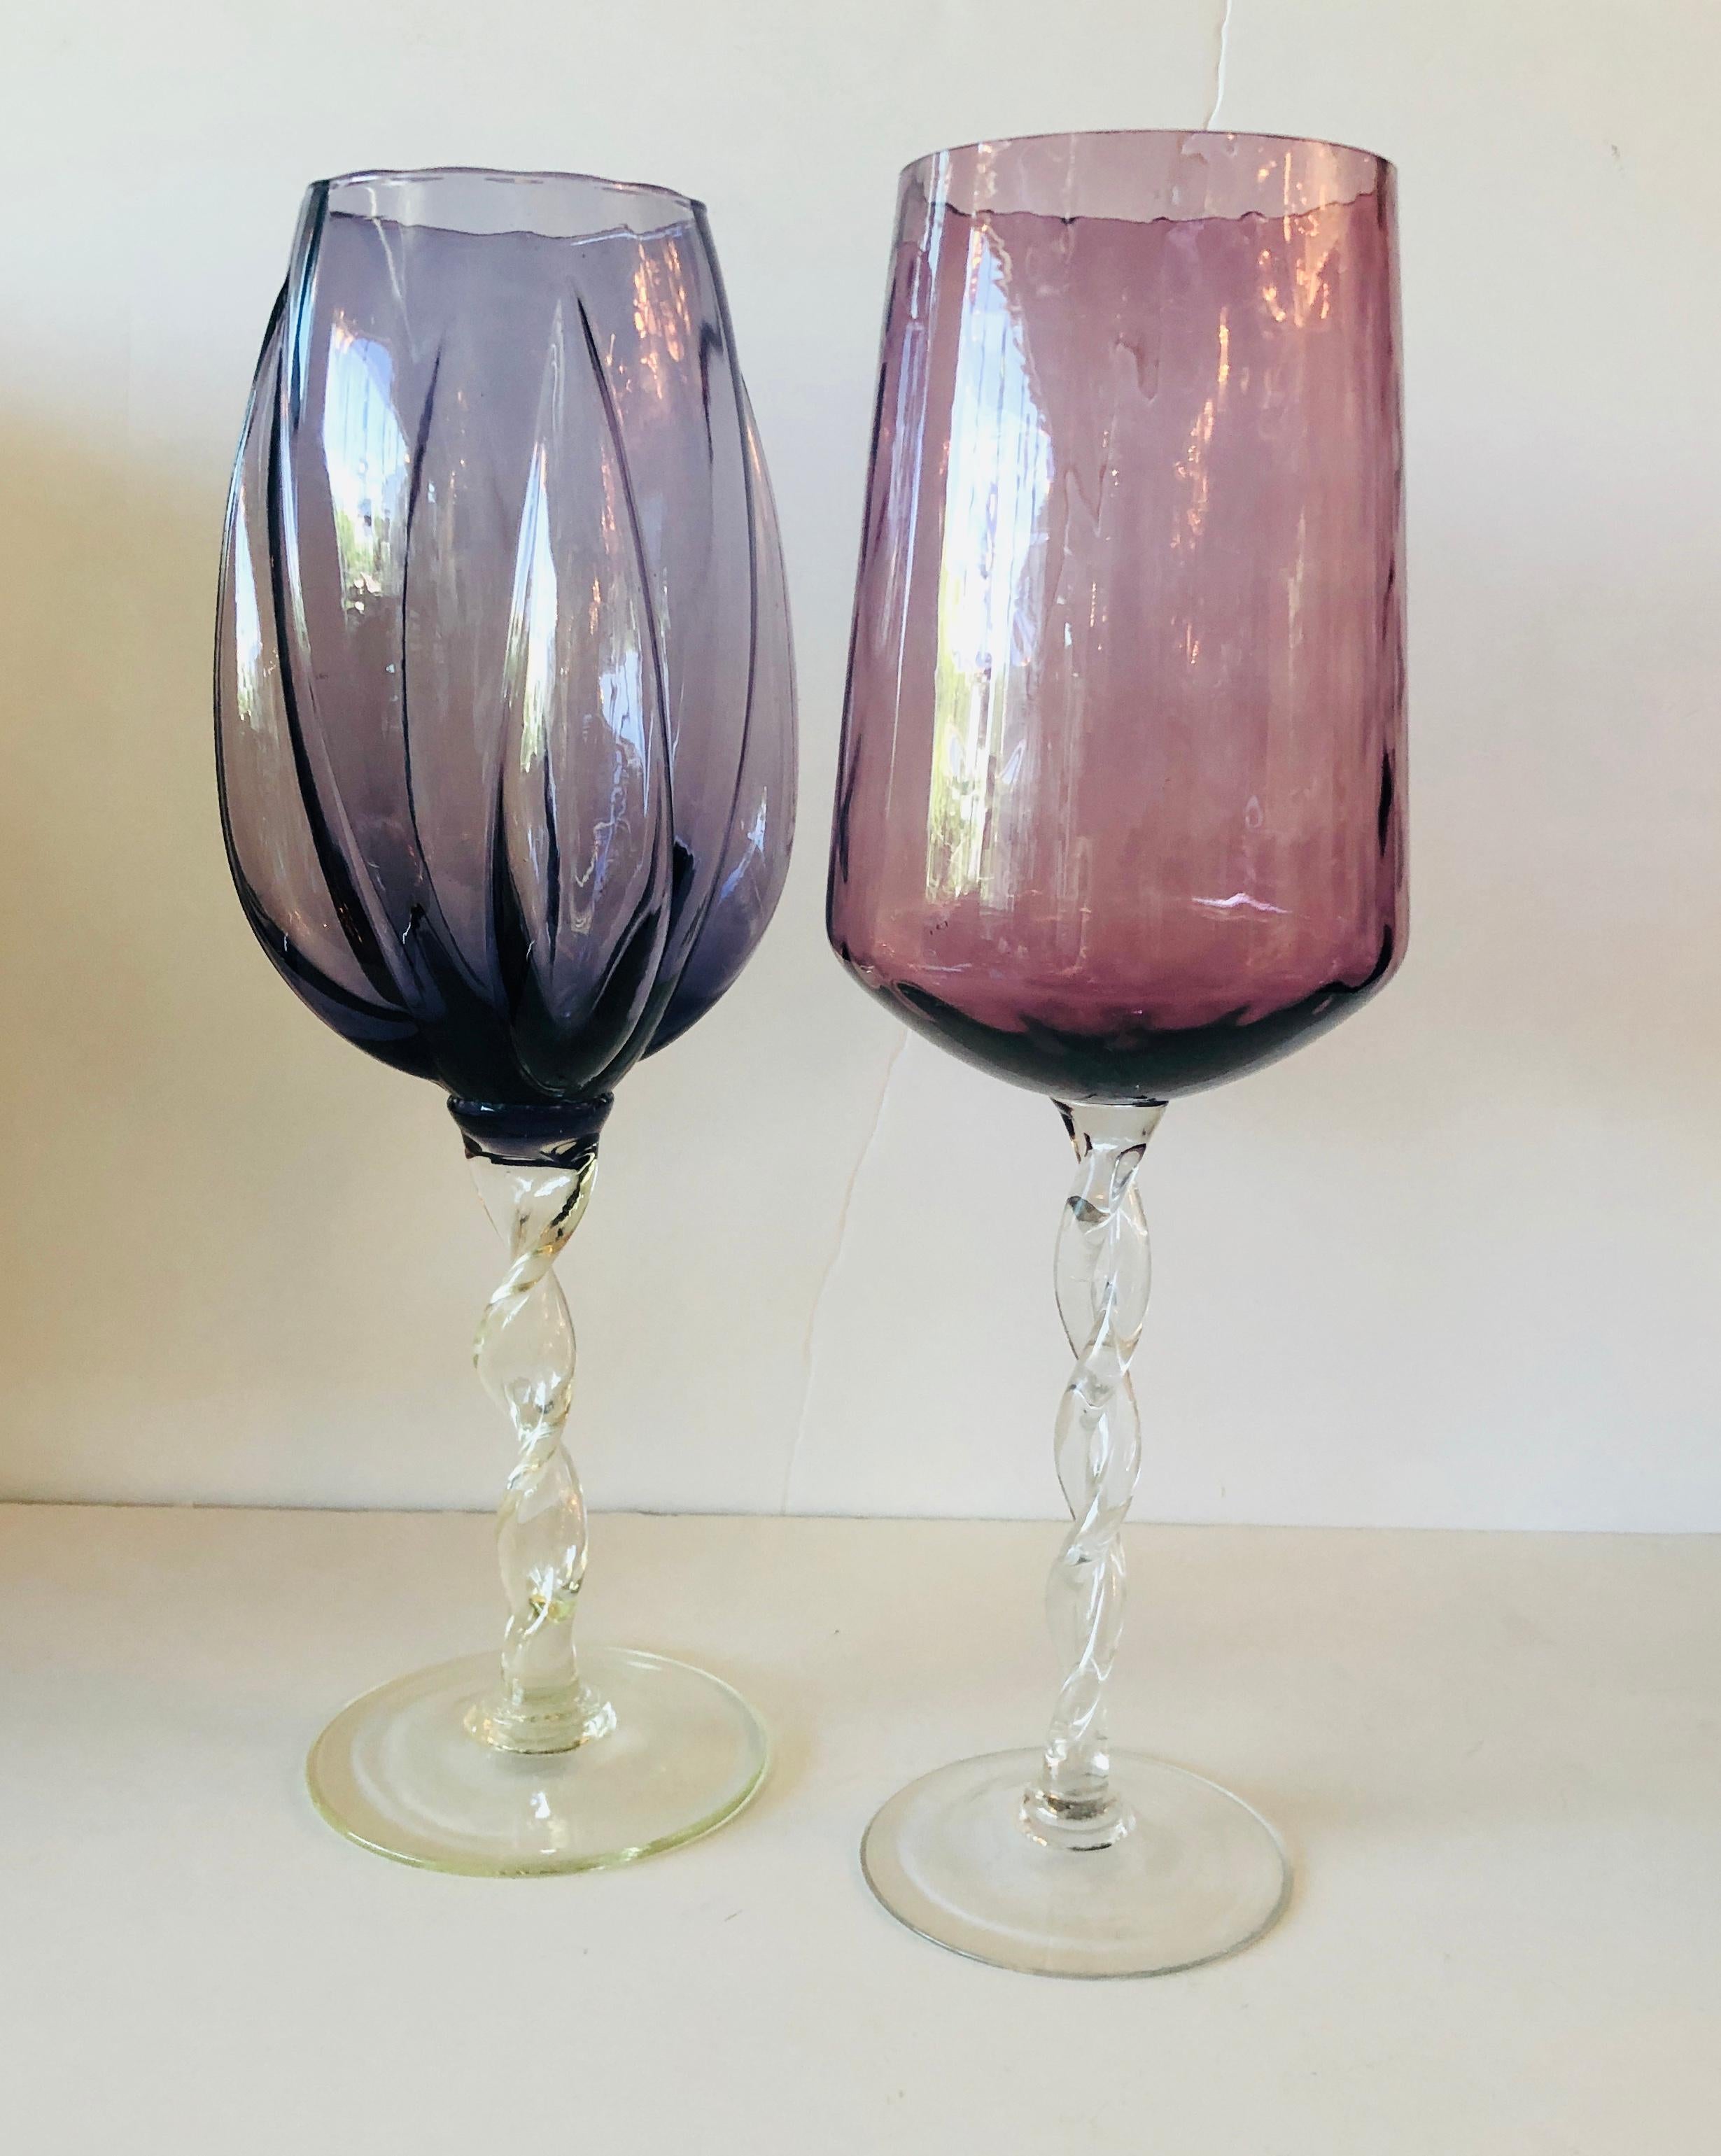 Offered are two hand blown Mid-Century Modern over-sized glass brandy snifters or vases in cranberry red / pink and eggplant purple with braided clear stems. Would look great as decor, with flowers or on a bar or bar cart. Can be purchased as a set